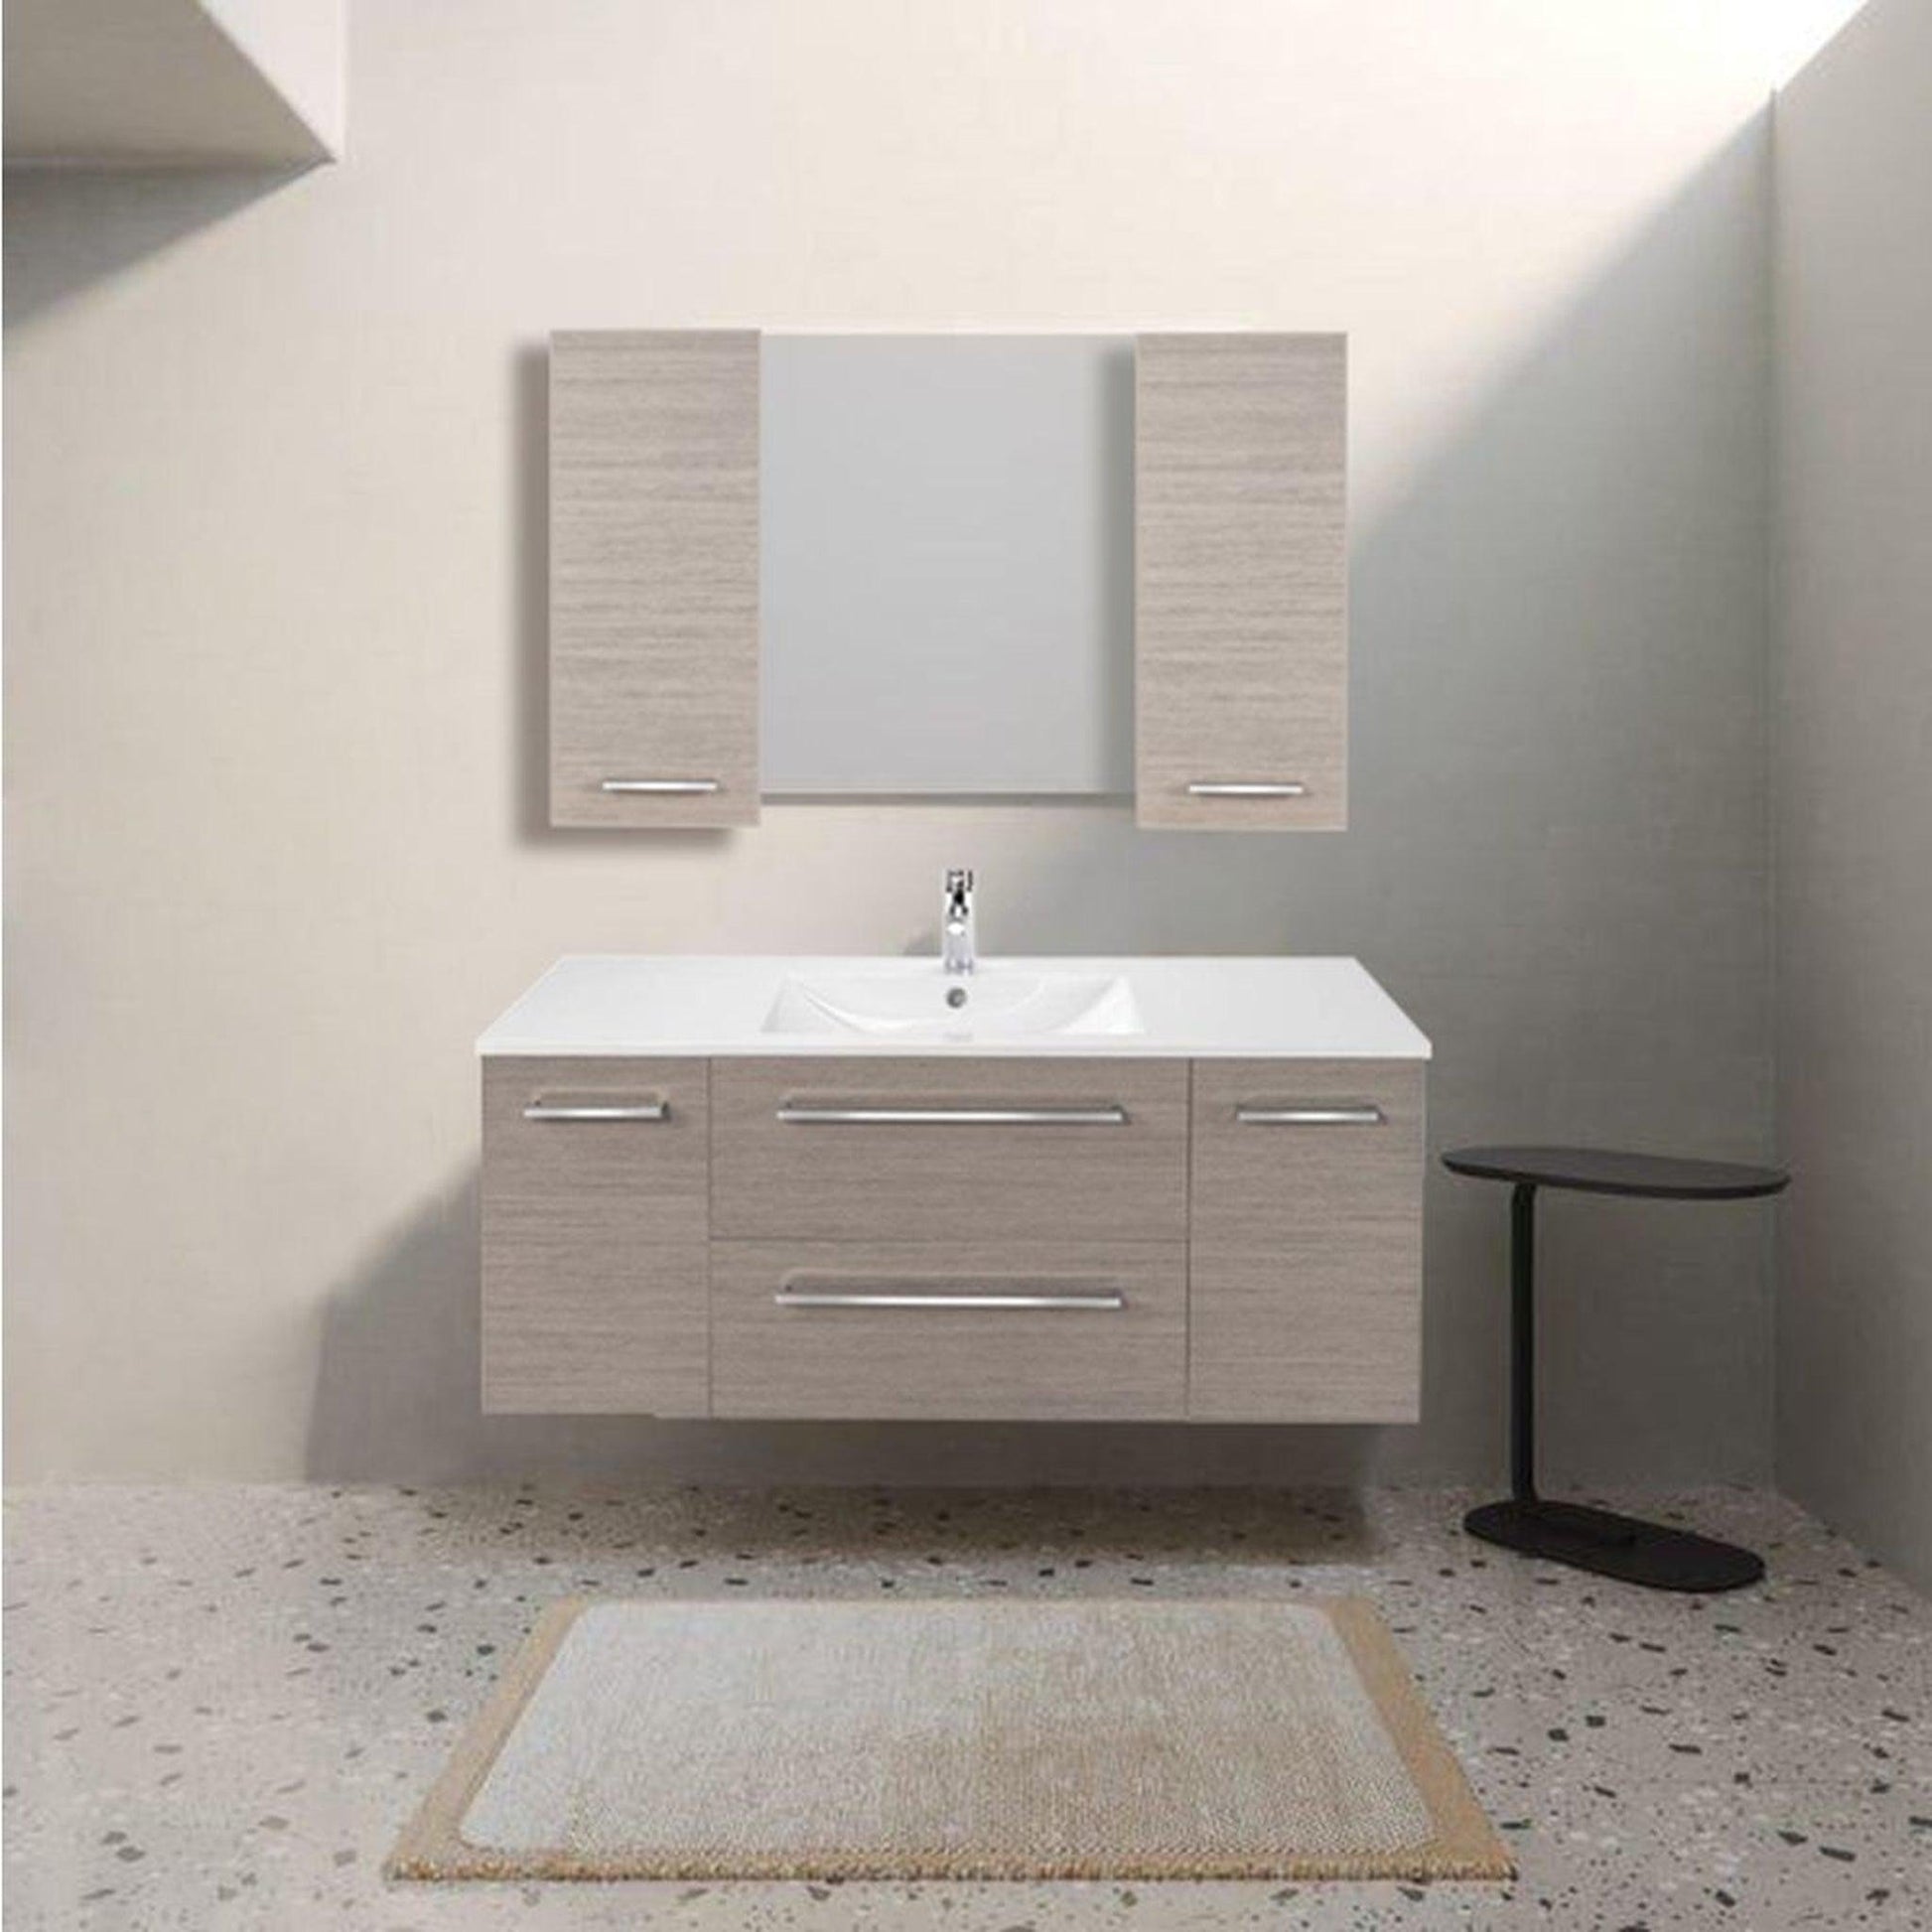 Abby Bath Aiden 48” x 20” Wall-Mounted Vanity in Slate Finish With Two Drawers and Chrome Handles